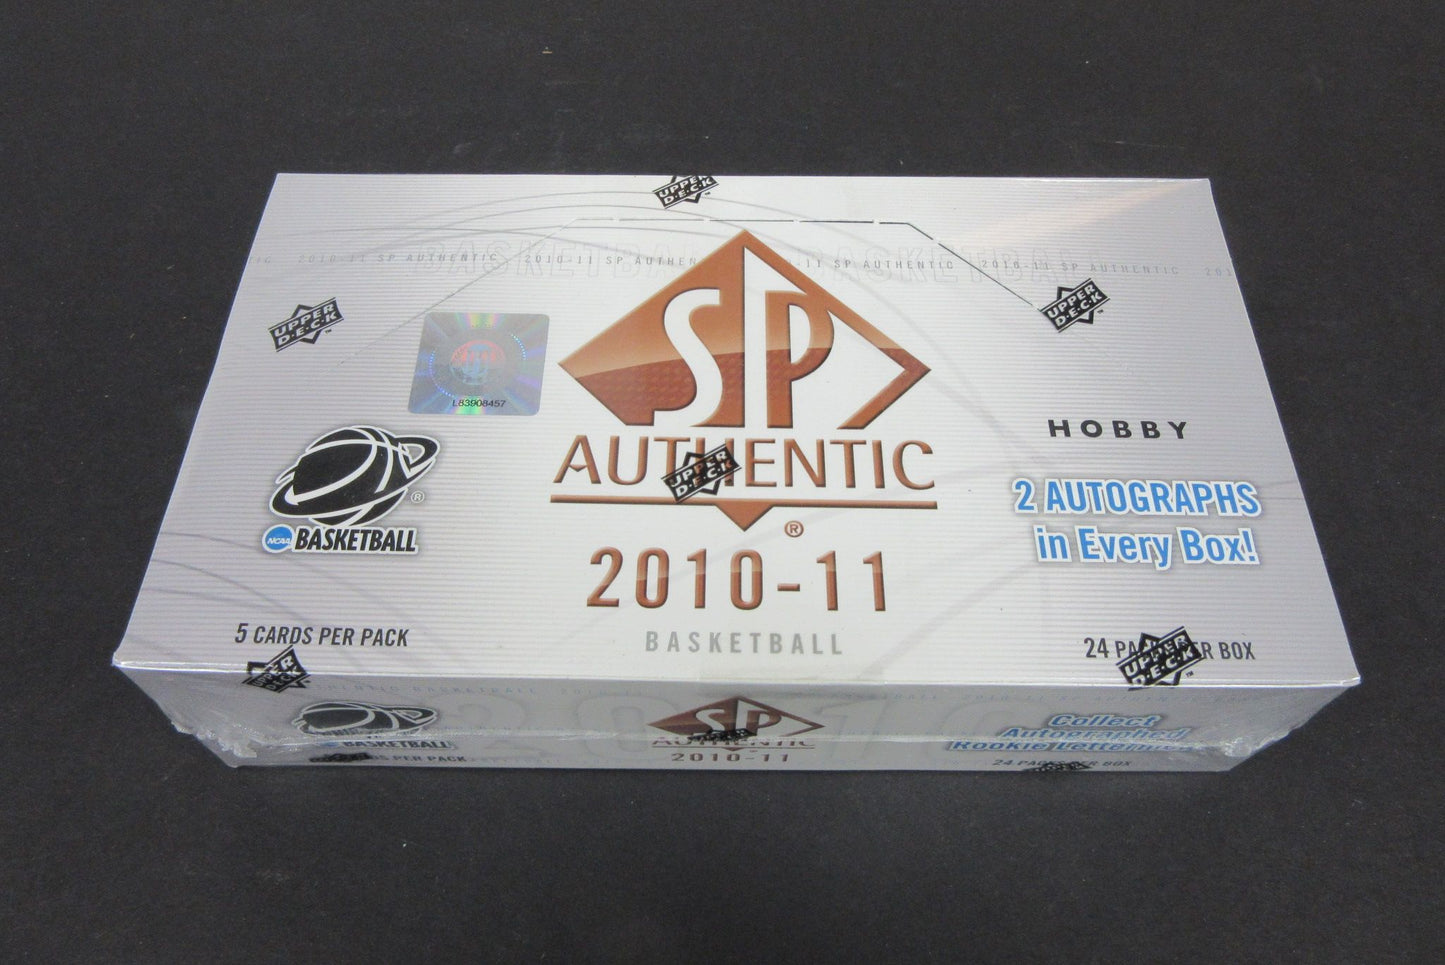 2010/11 Upper Deck SP Authentic Basketball Box (Hobby)